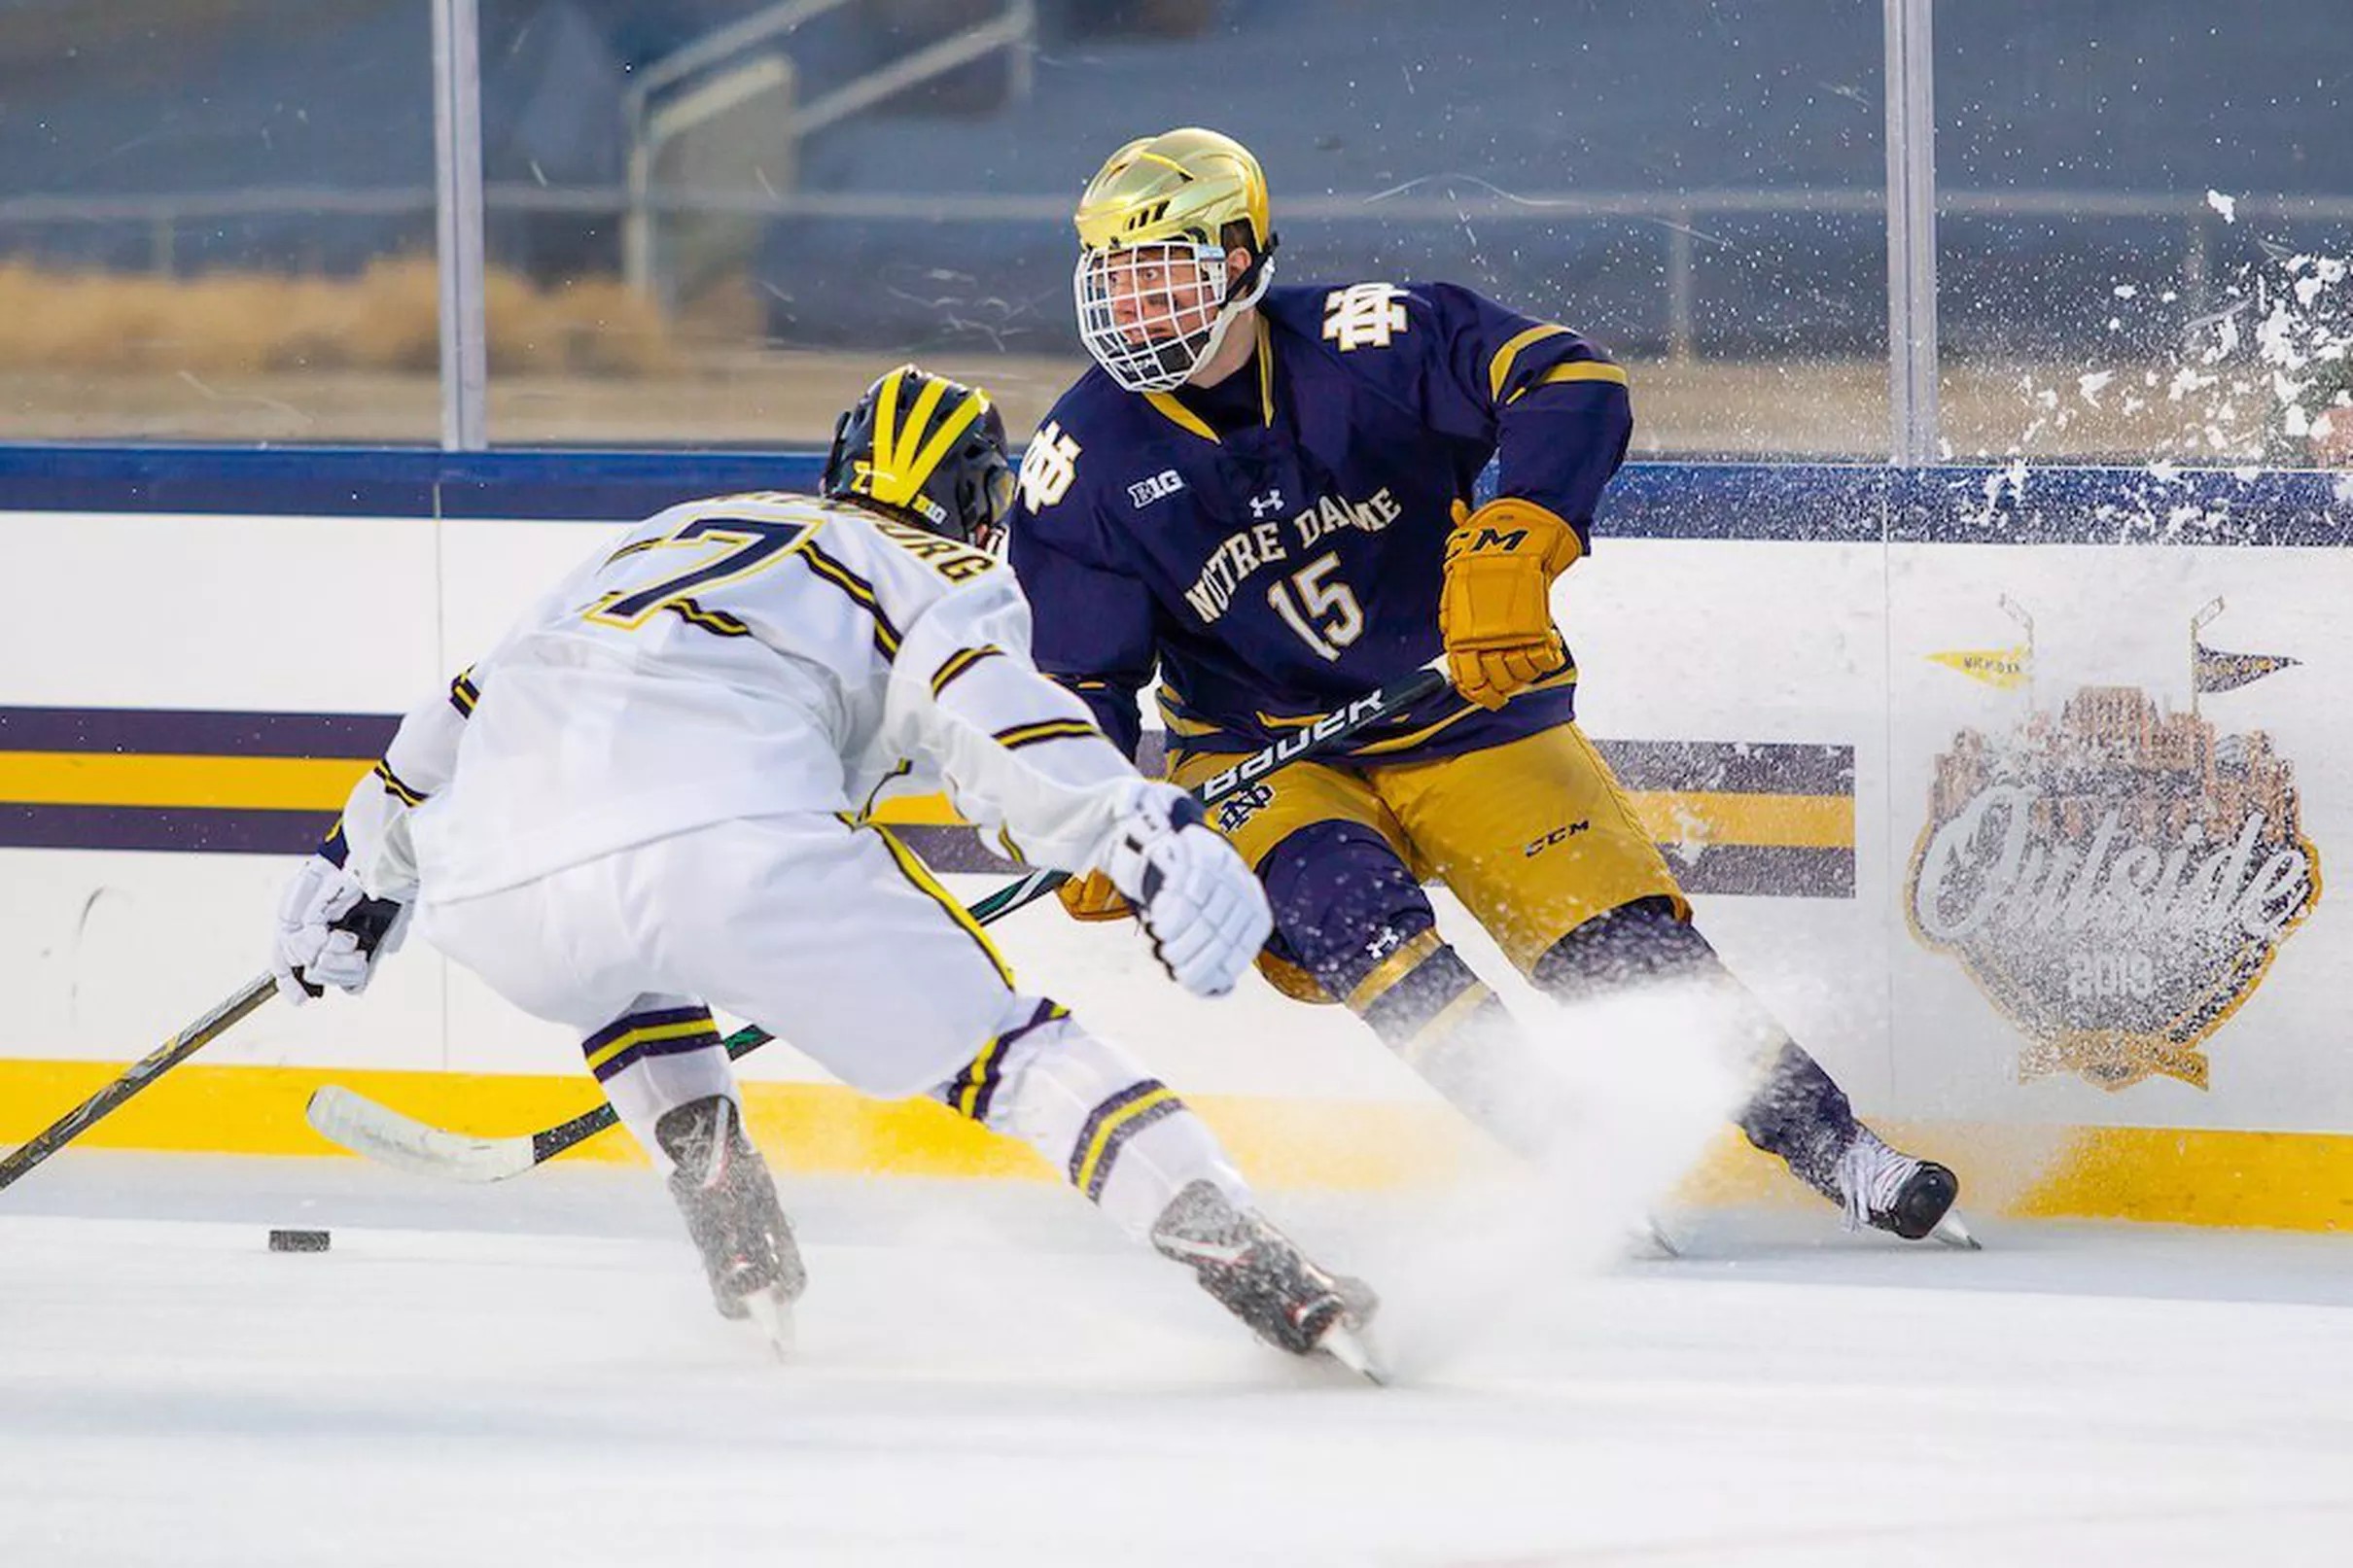 Notre Dame Hockey Falls to Michigan 4-2 in Outdoor Game